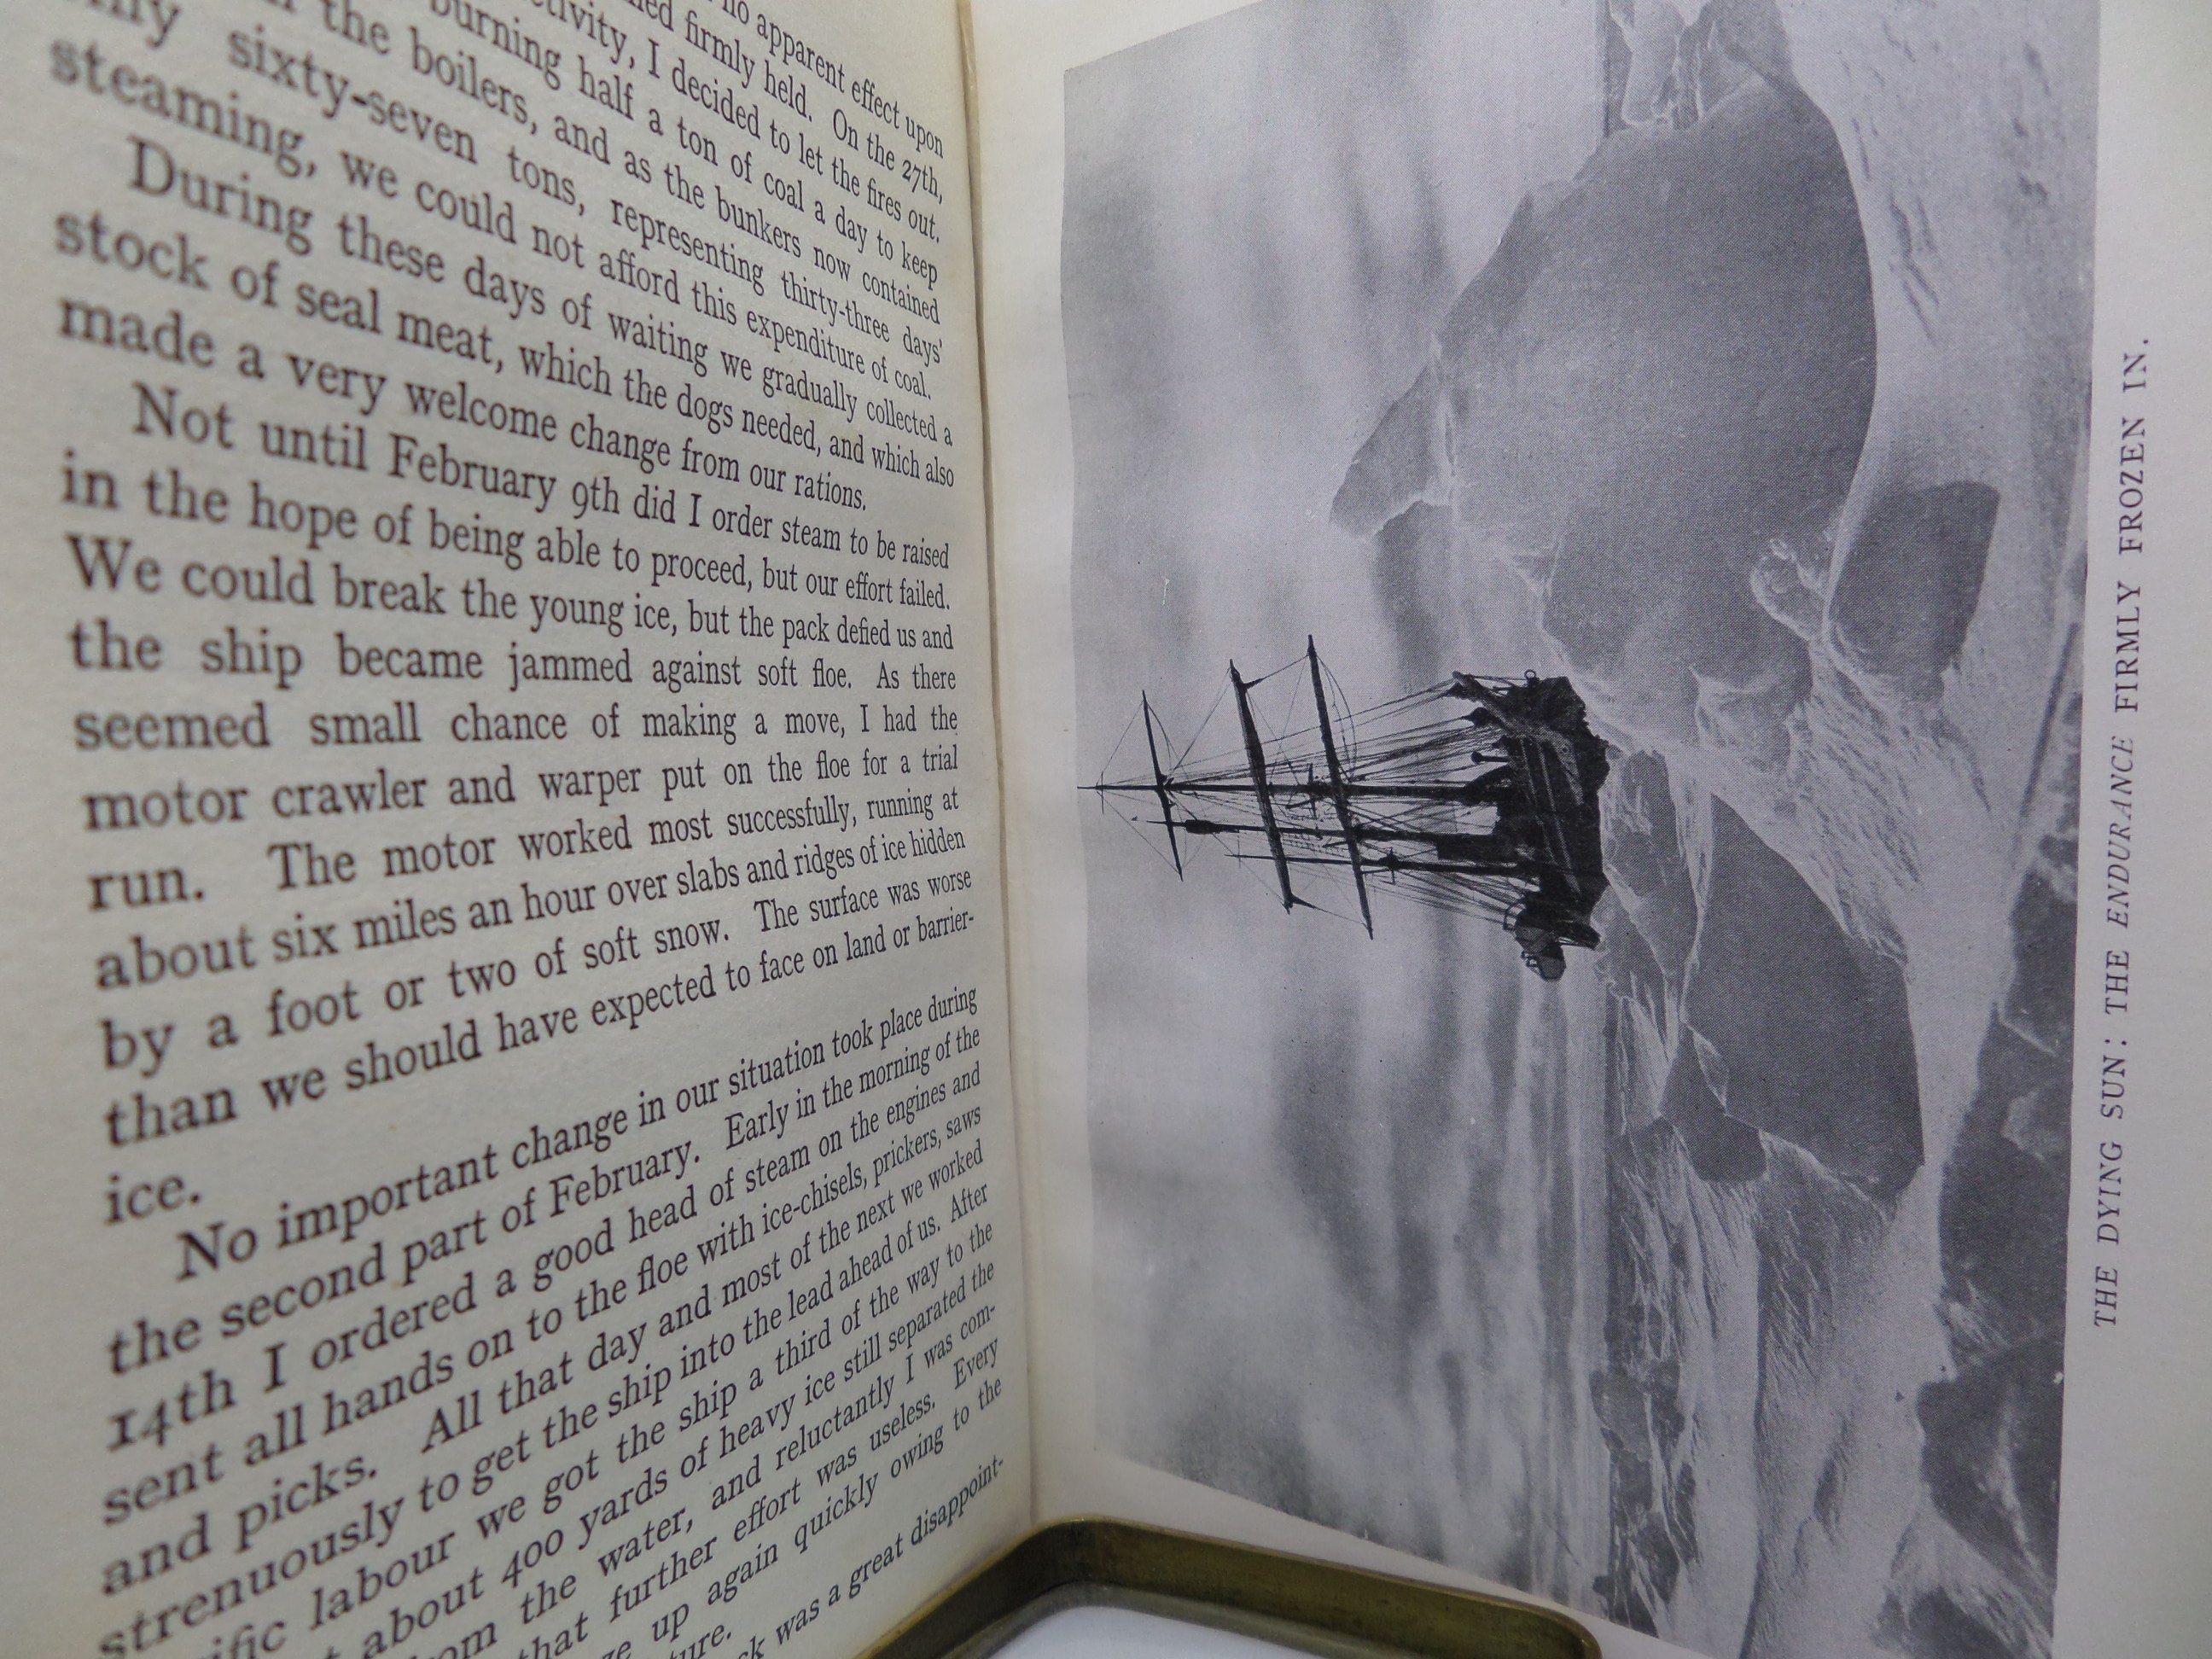 SOUTH: THE STORY OF SHACKLETON'S 1914-1917 EXPEDITION BY SIR ERNEST SHACKLETON